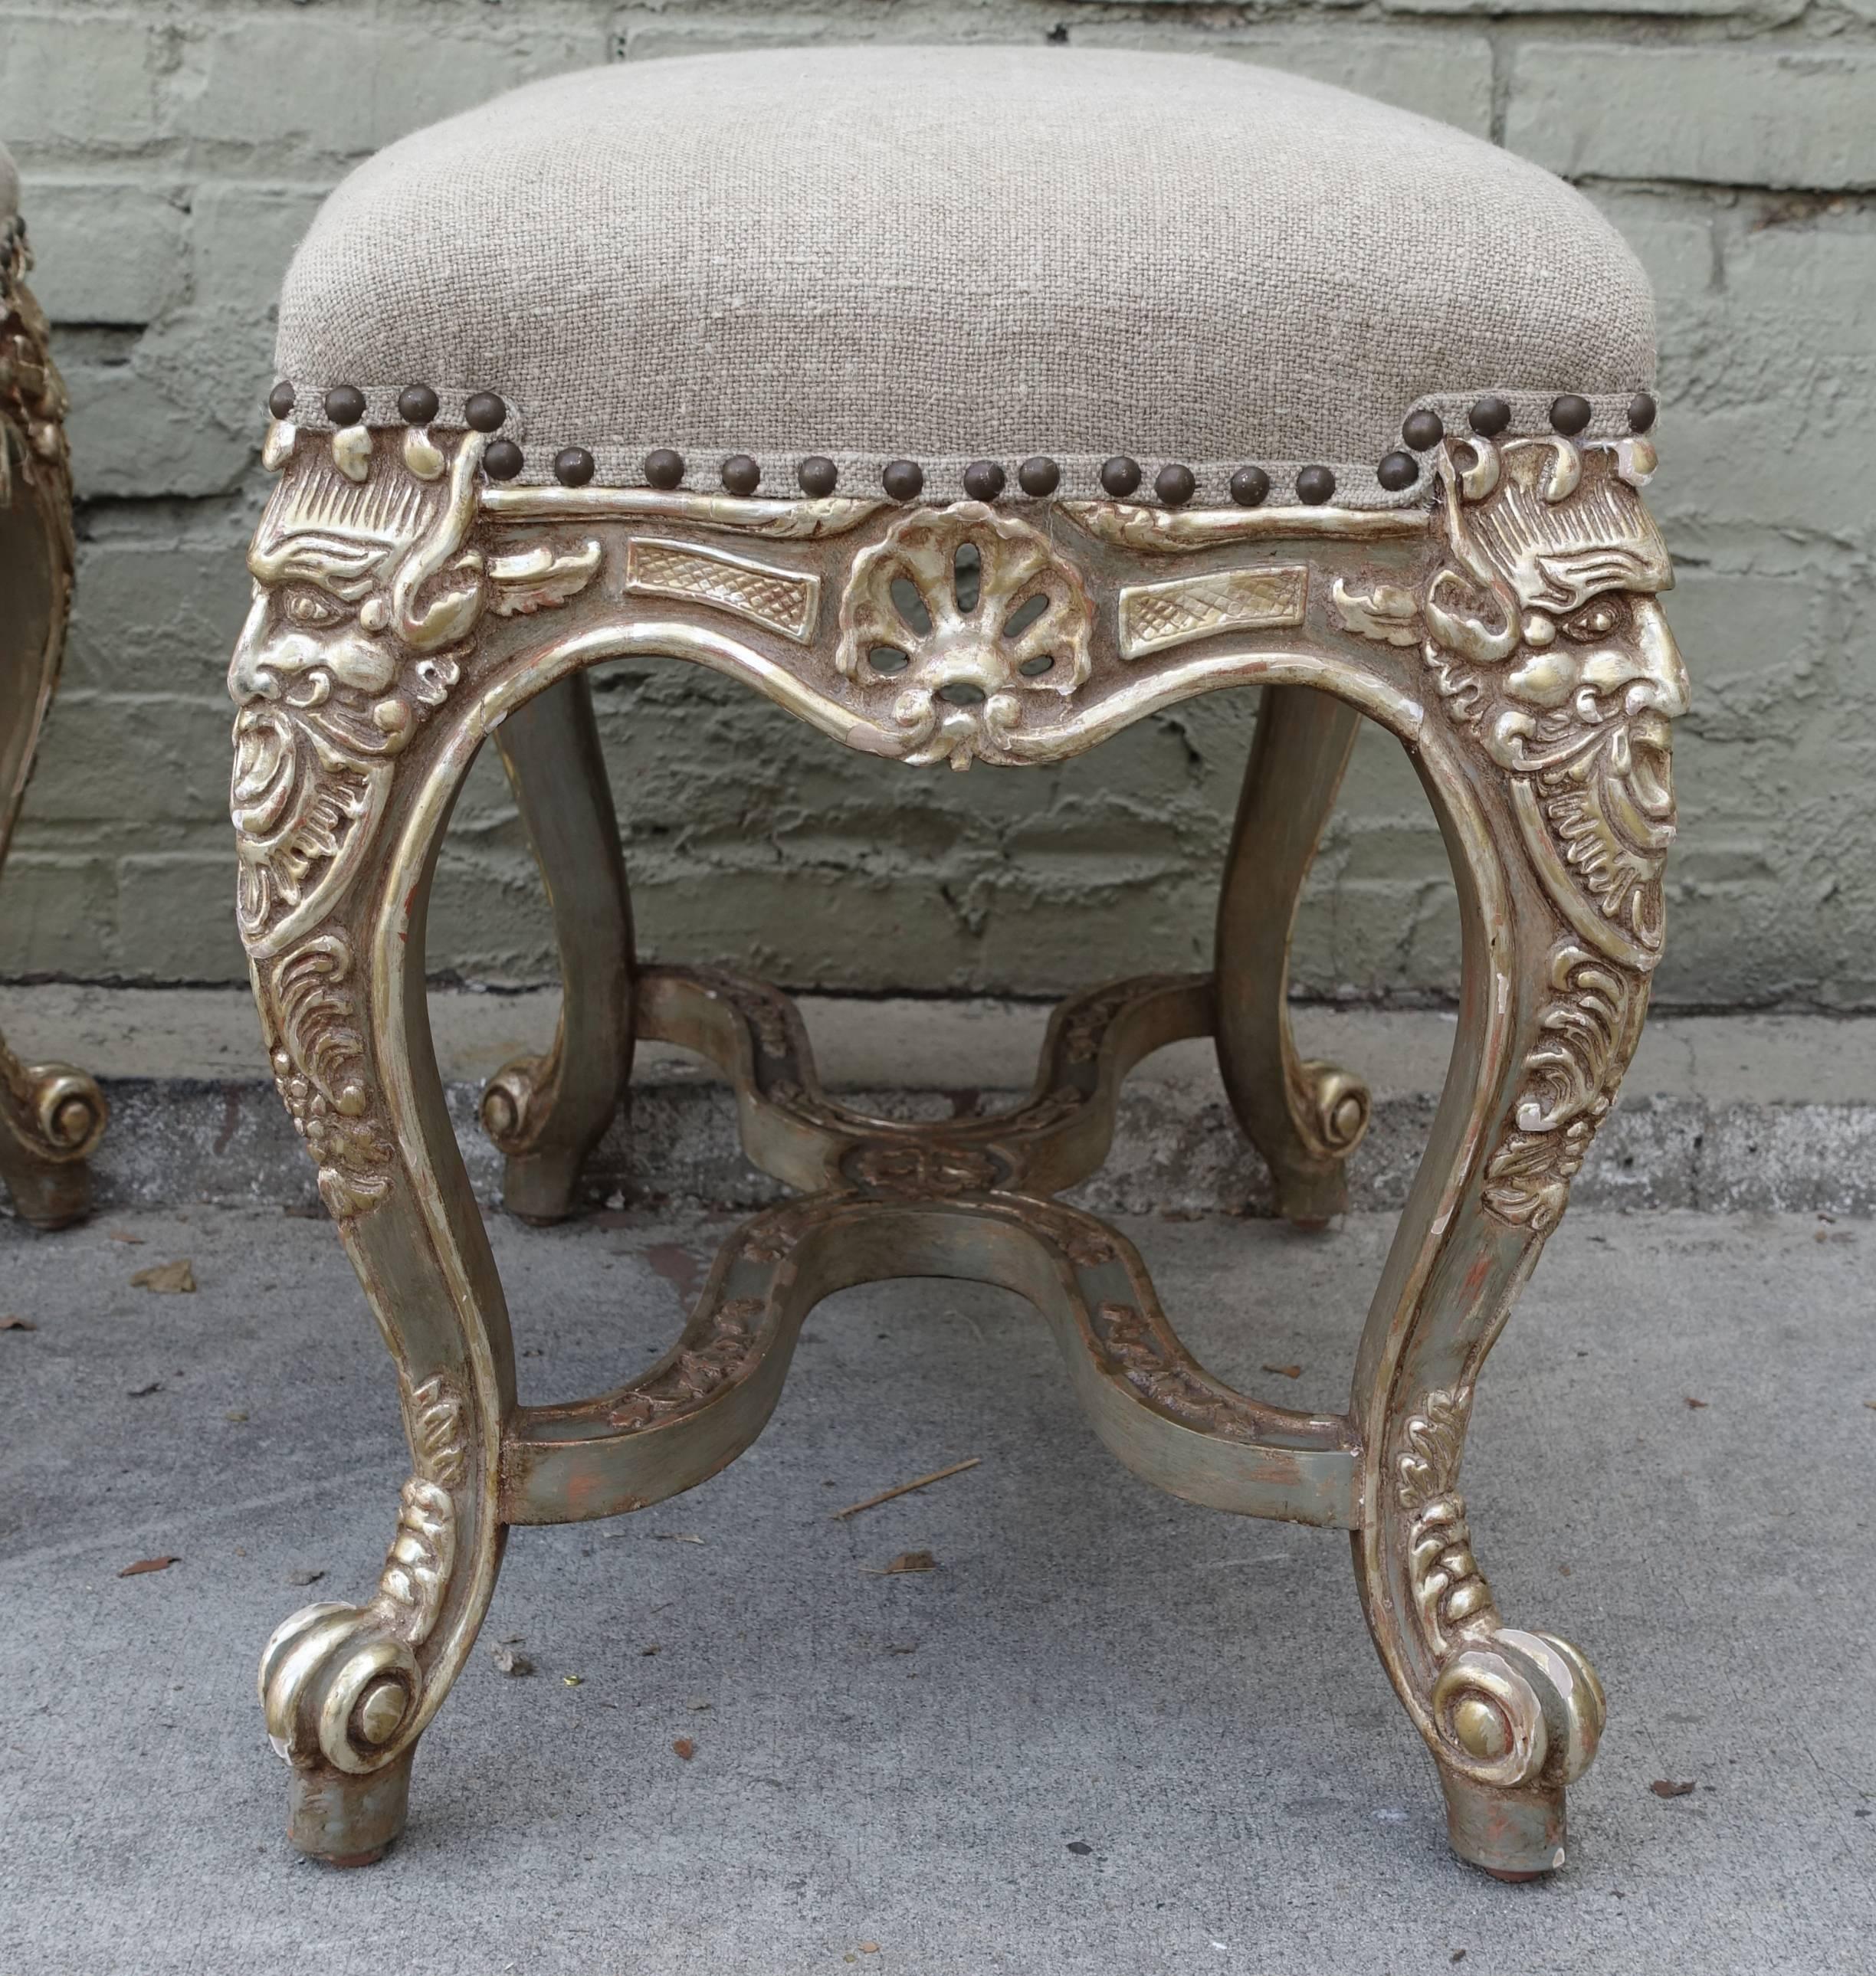 Pair of French carved Rococo style painted and silver gilt benches upholstered in Belgium linen with nailhead trim detail.